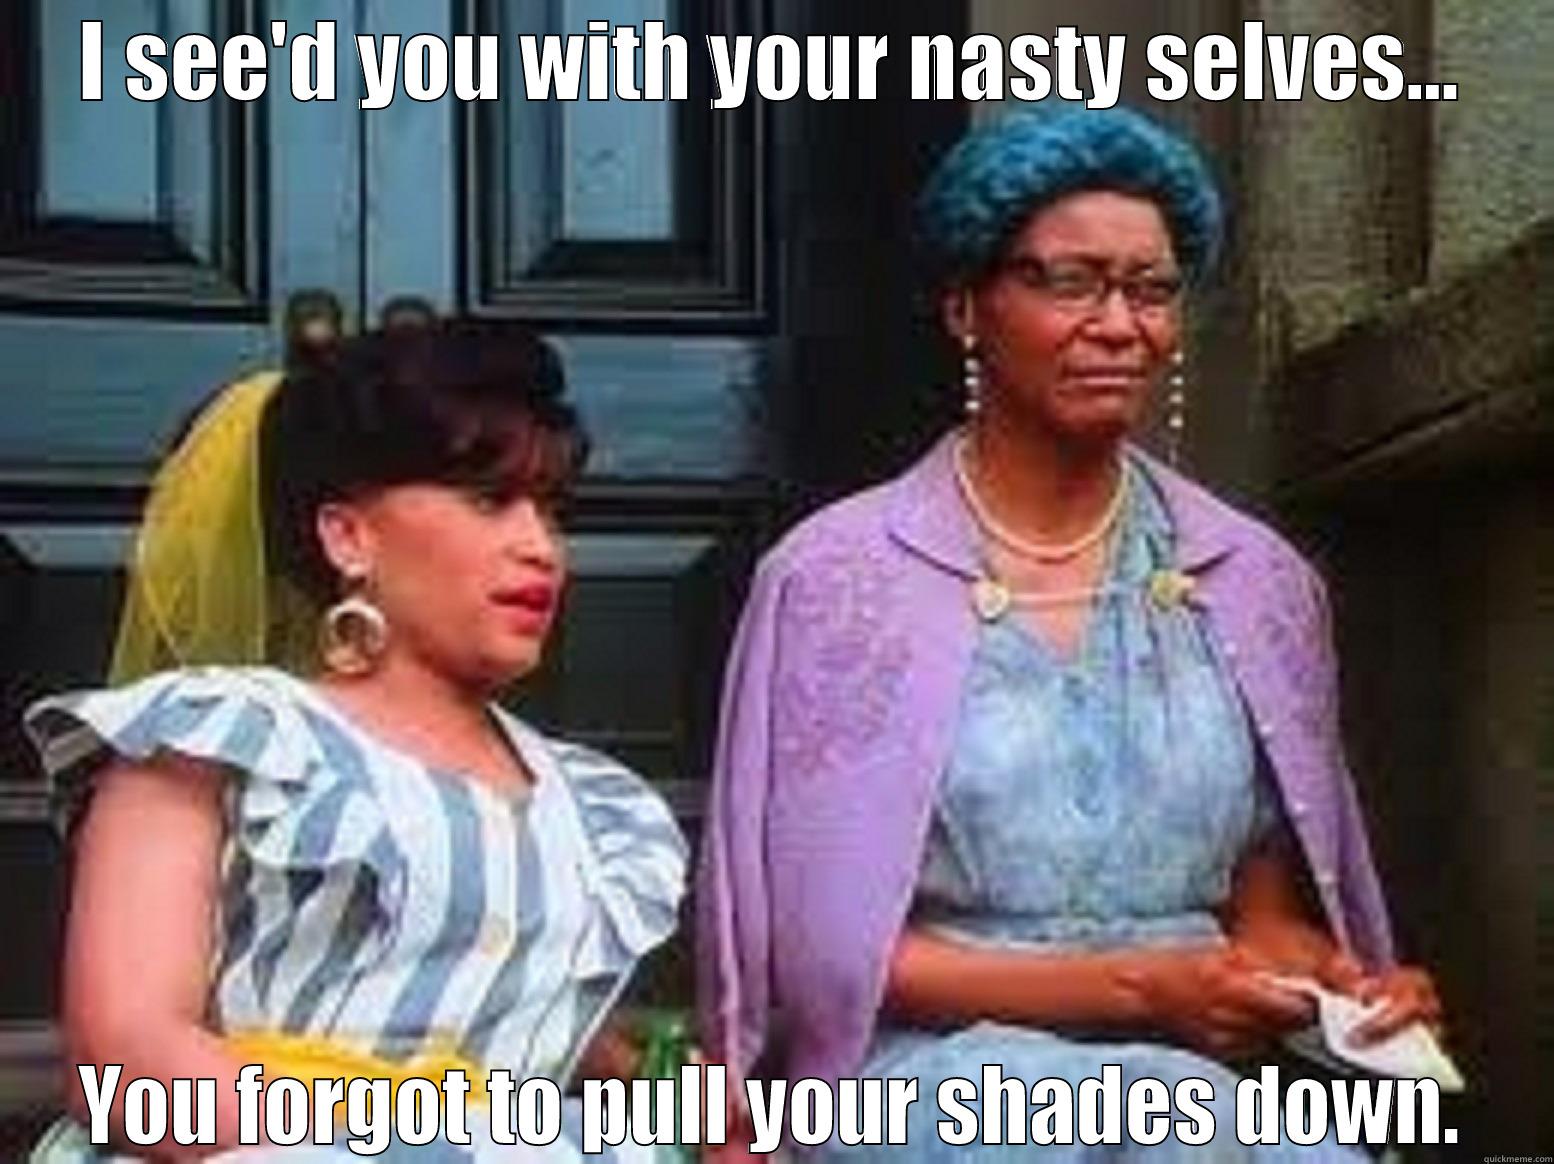 I SEE'D YOU WITH YOUR NASTY SELVES... YOU FORGOT TO PULL YOUR SHADES DOWN. Misc